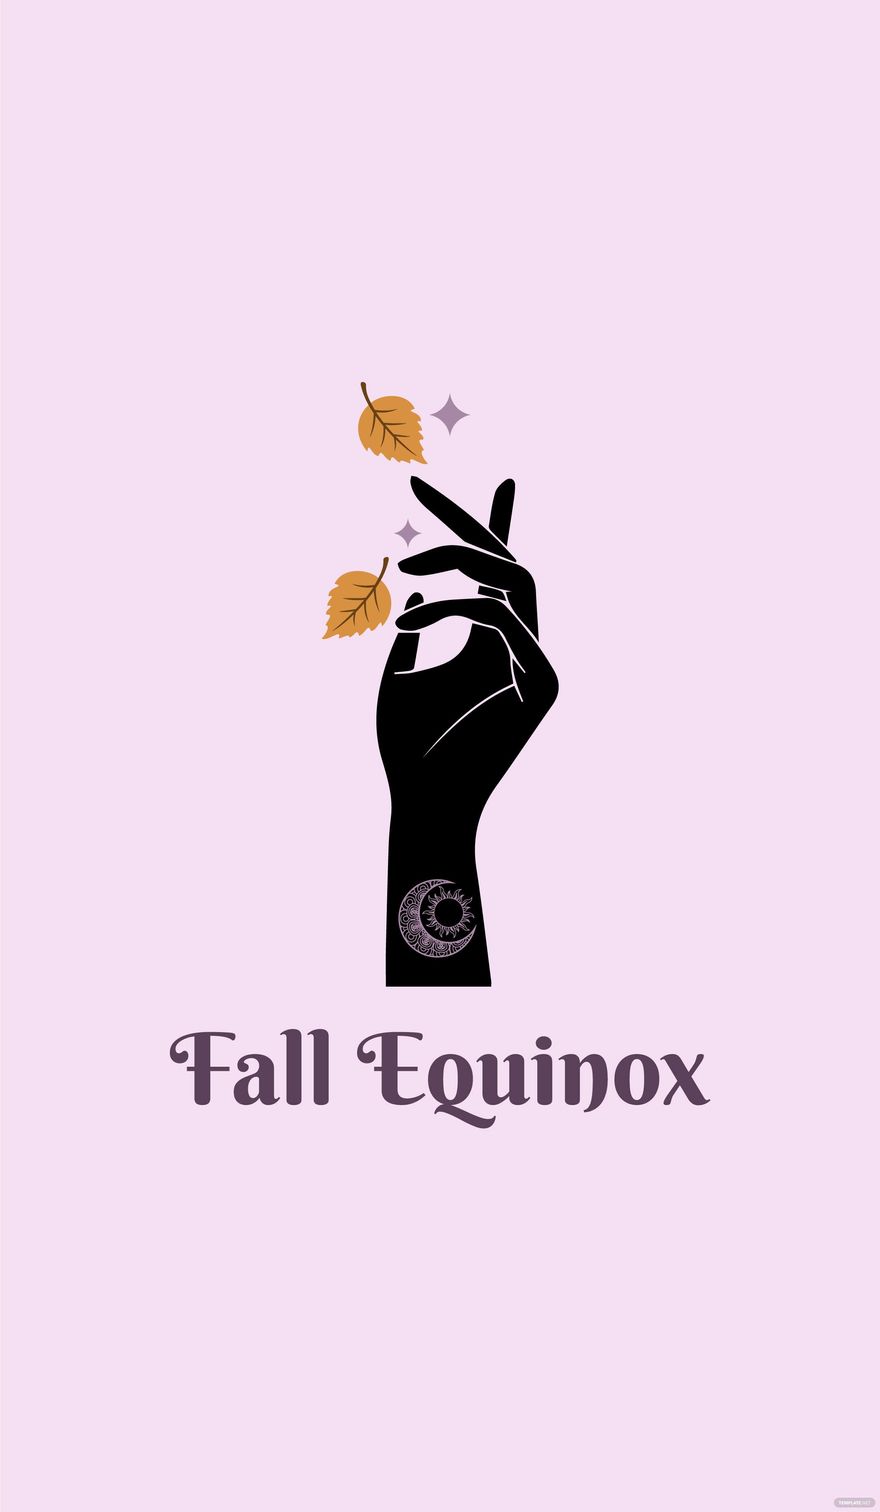 Free Fall Equinox iPhone Background in PDF, Illustrator, PSD, EPS, SVG, JPG, PNG